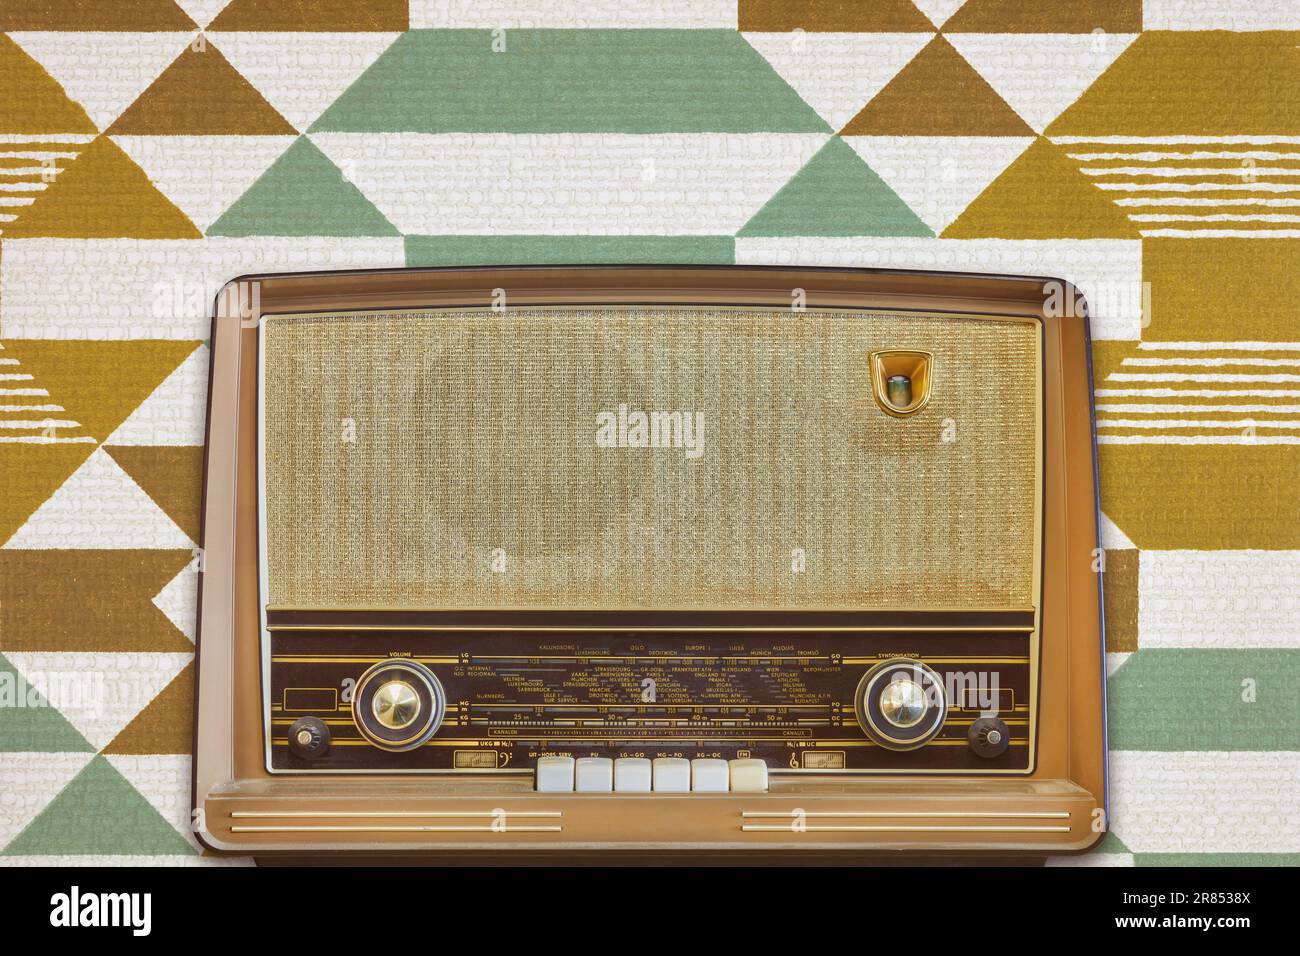 Vintage radio with display showing European cities in front of retro wallpaper Stock Photo